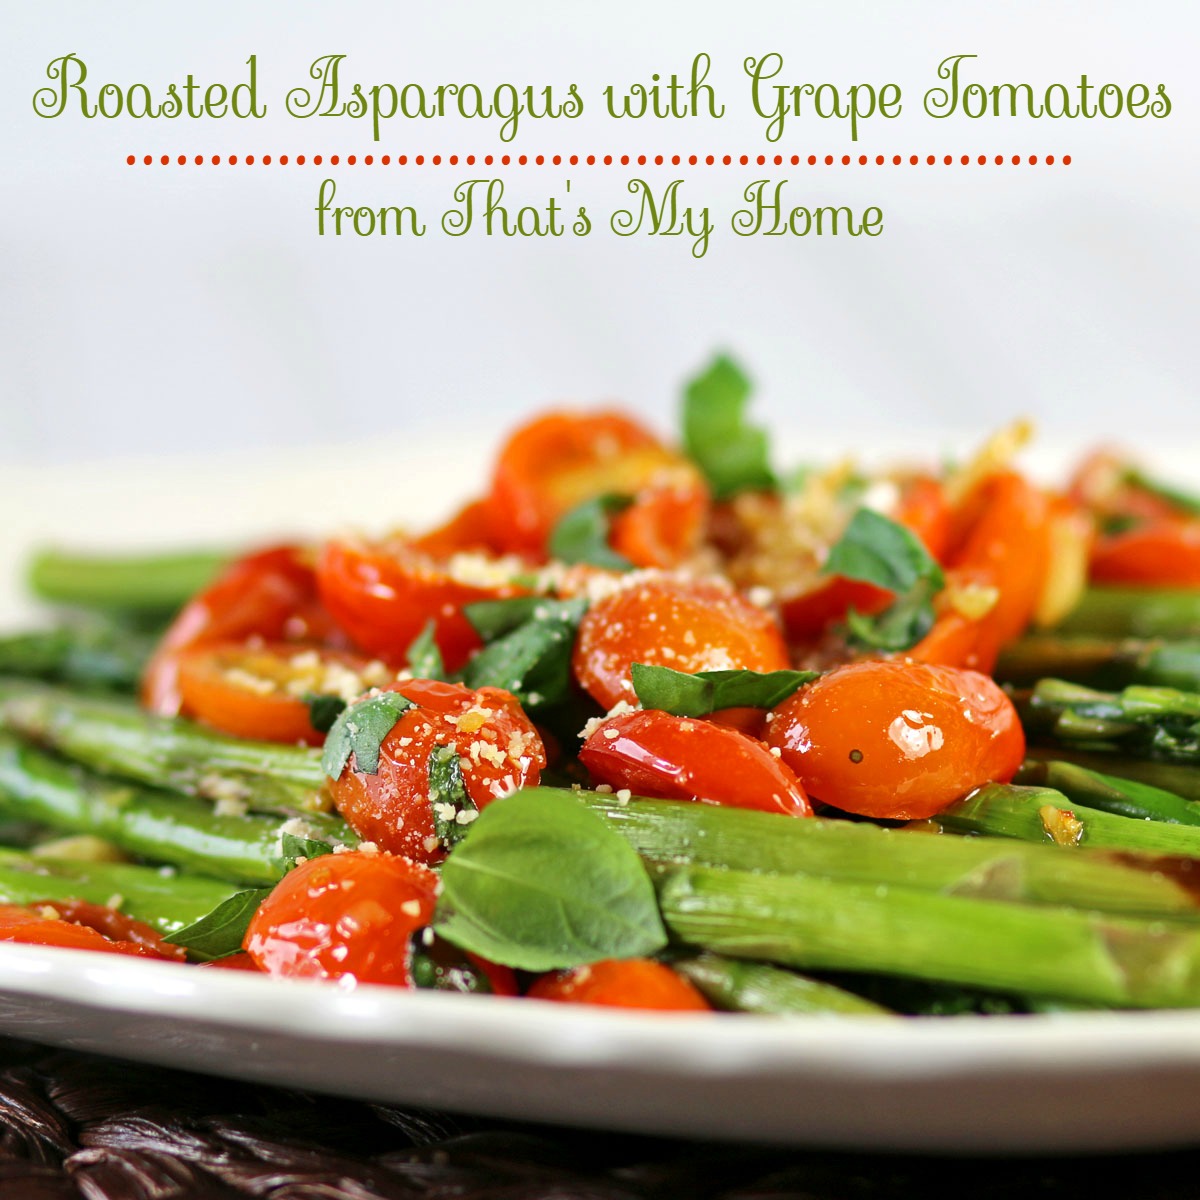 Roasted Asparagus with Garlic Grape Tomatoes